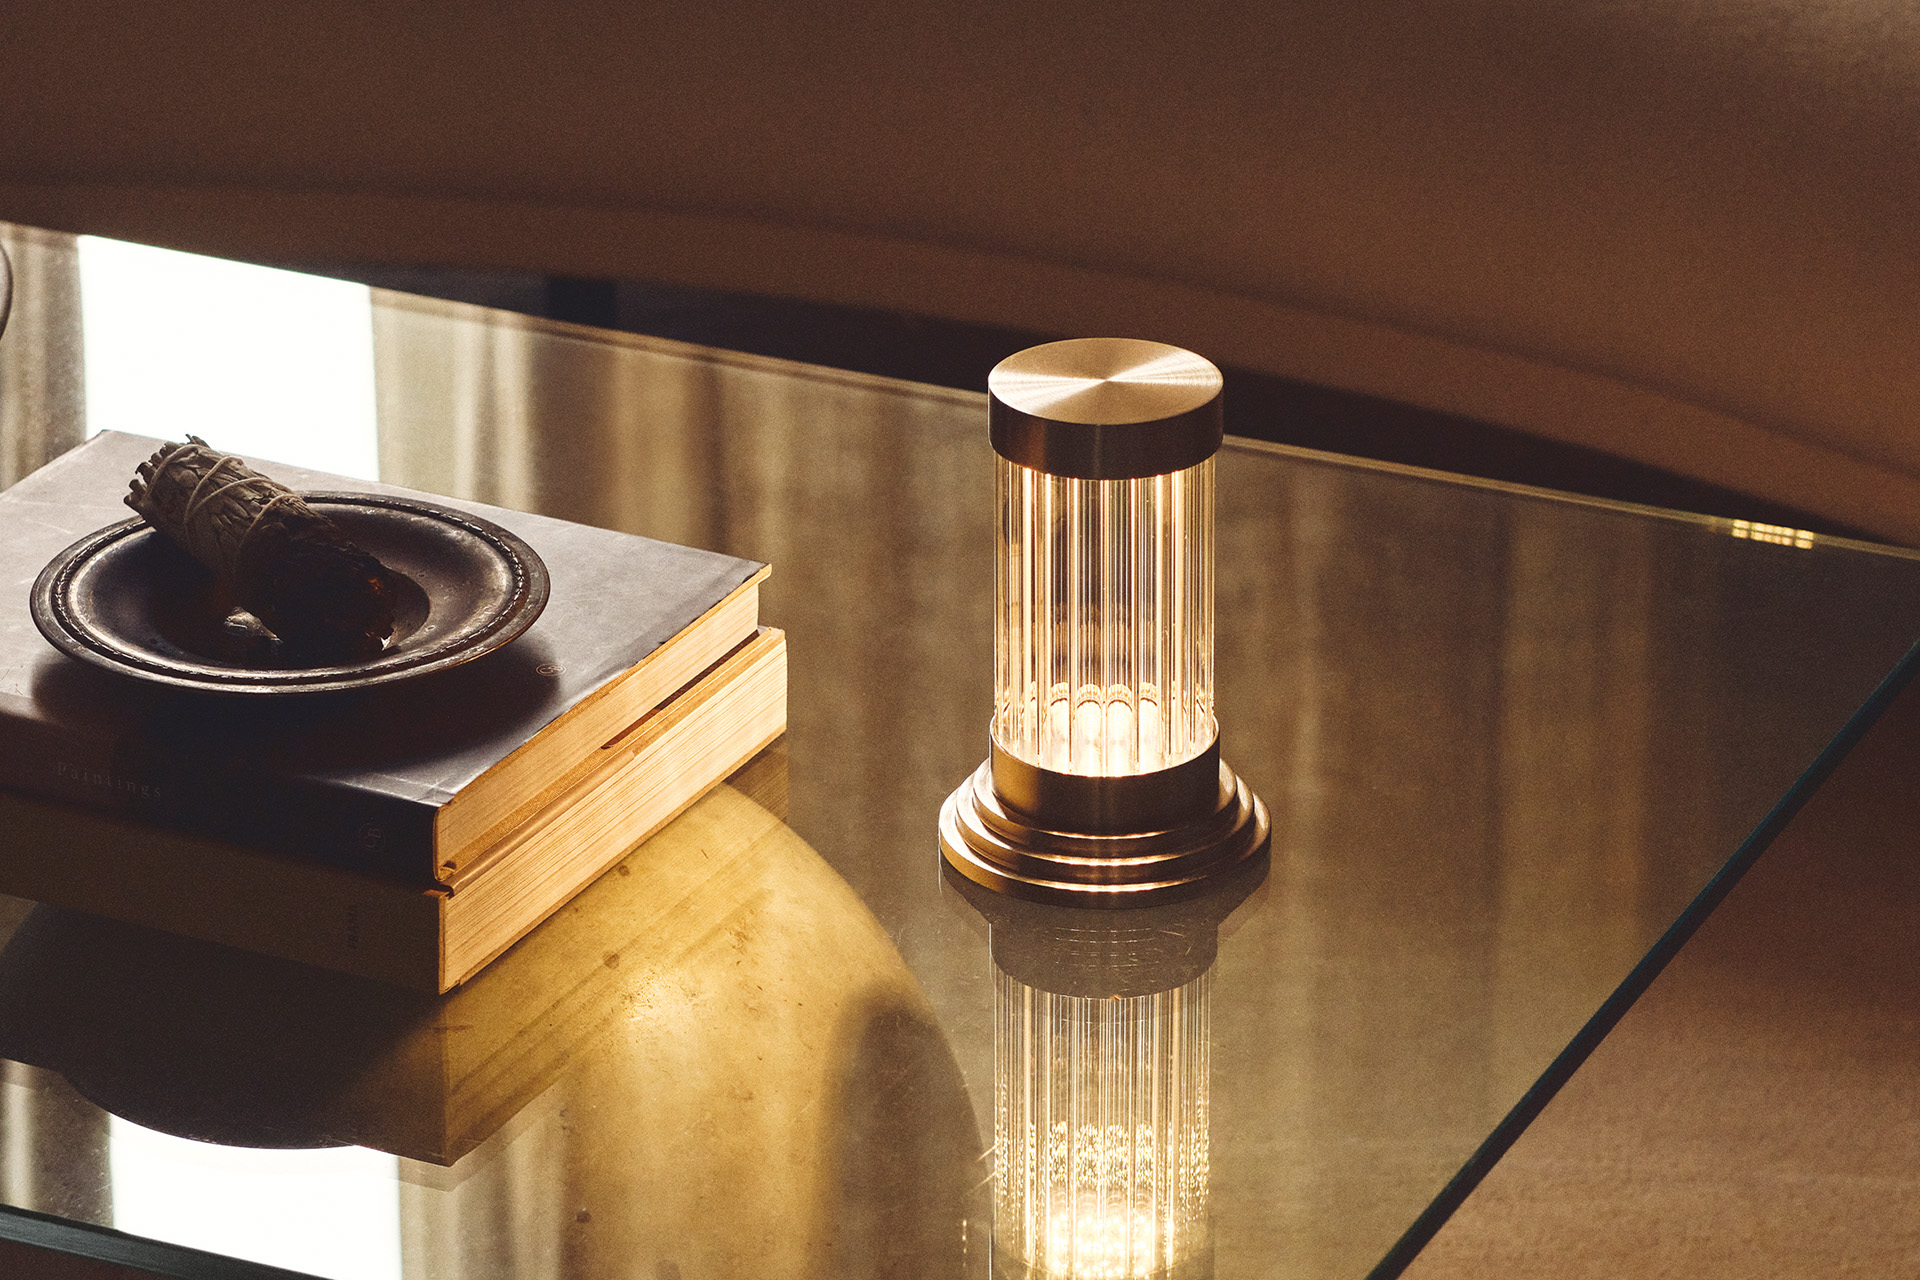 J. Adams & Co: Lighting Designed In London By A Business With A Bright Future